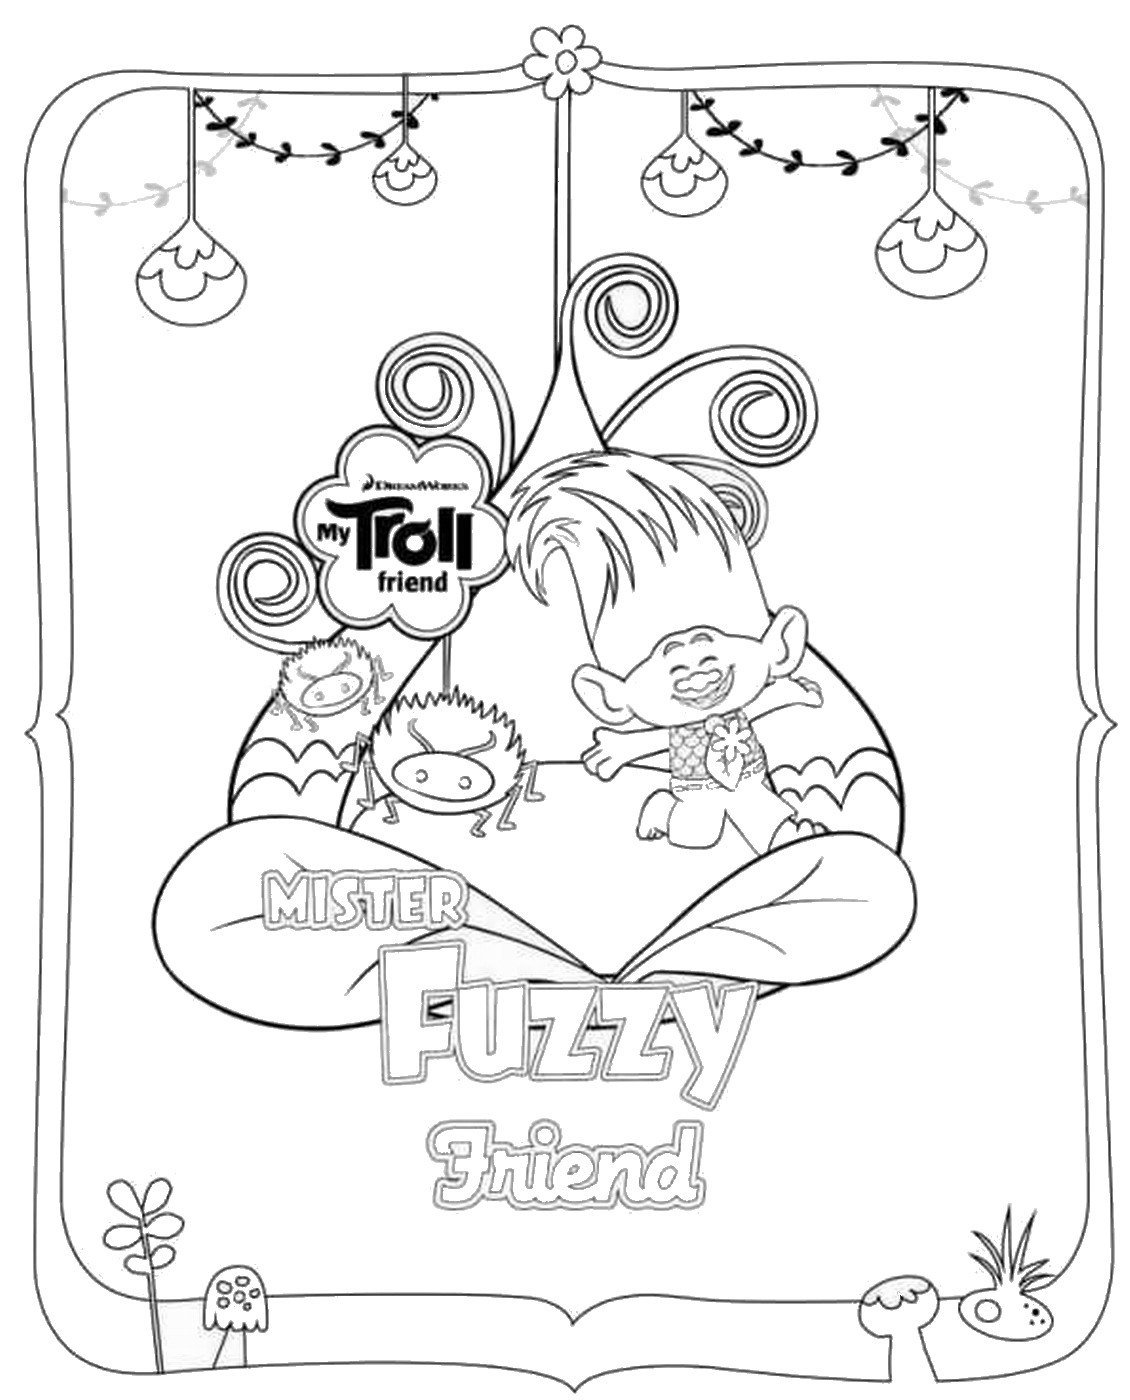 Trolls Movie Coloring Pages Trolls To Download Trolls Kids Coloring Pages